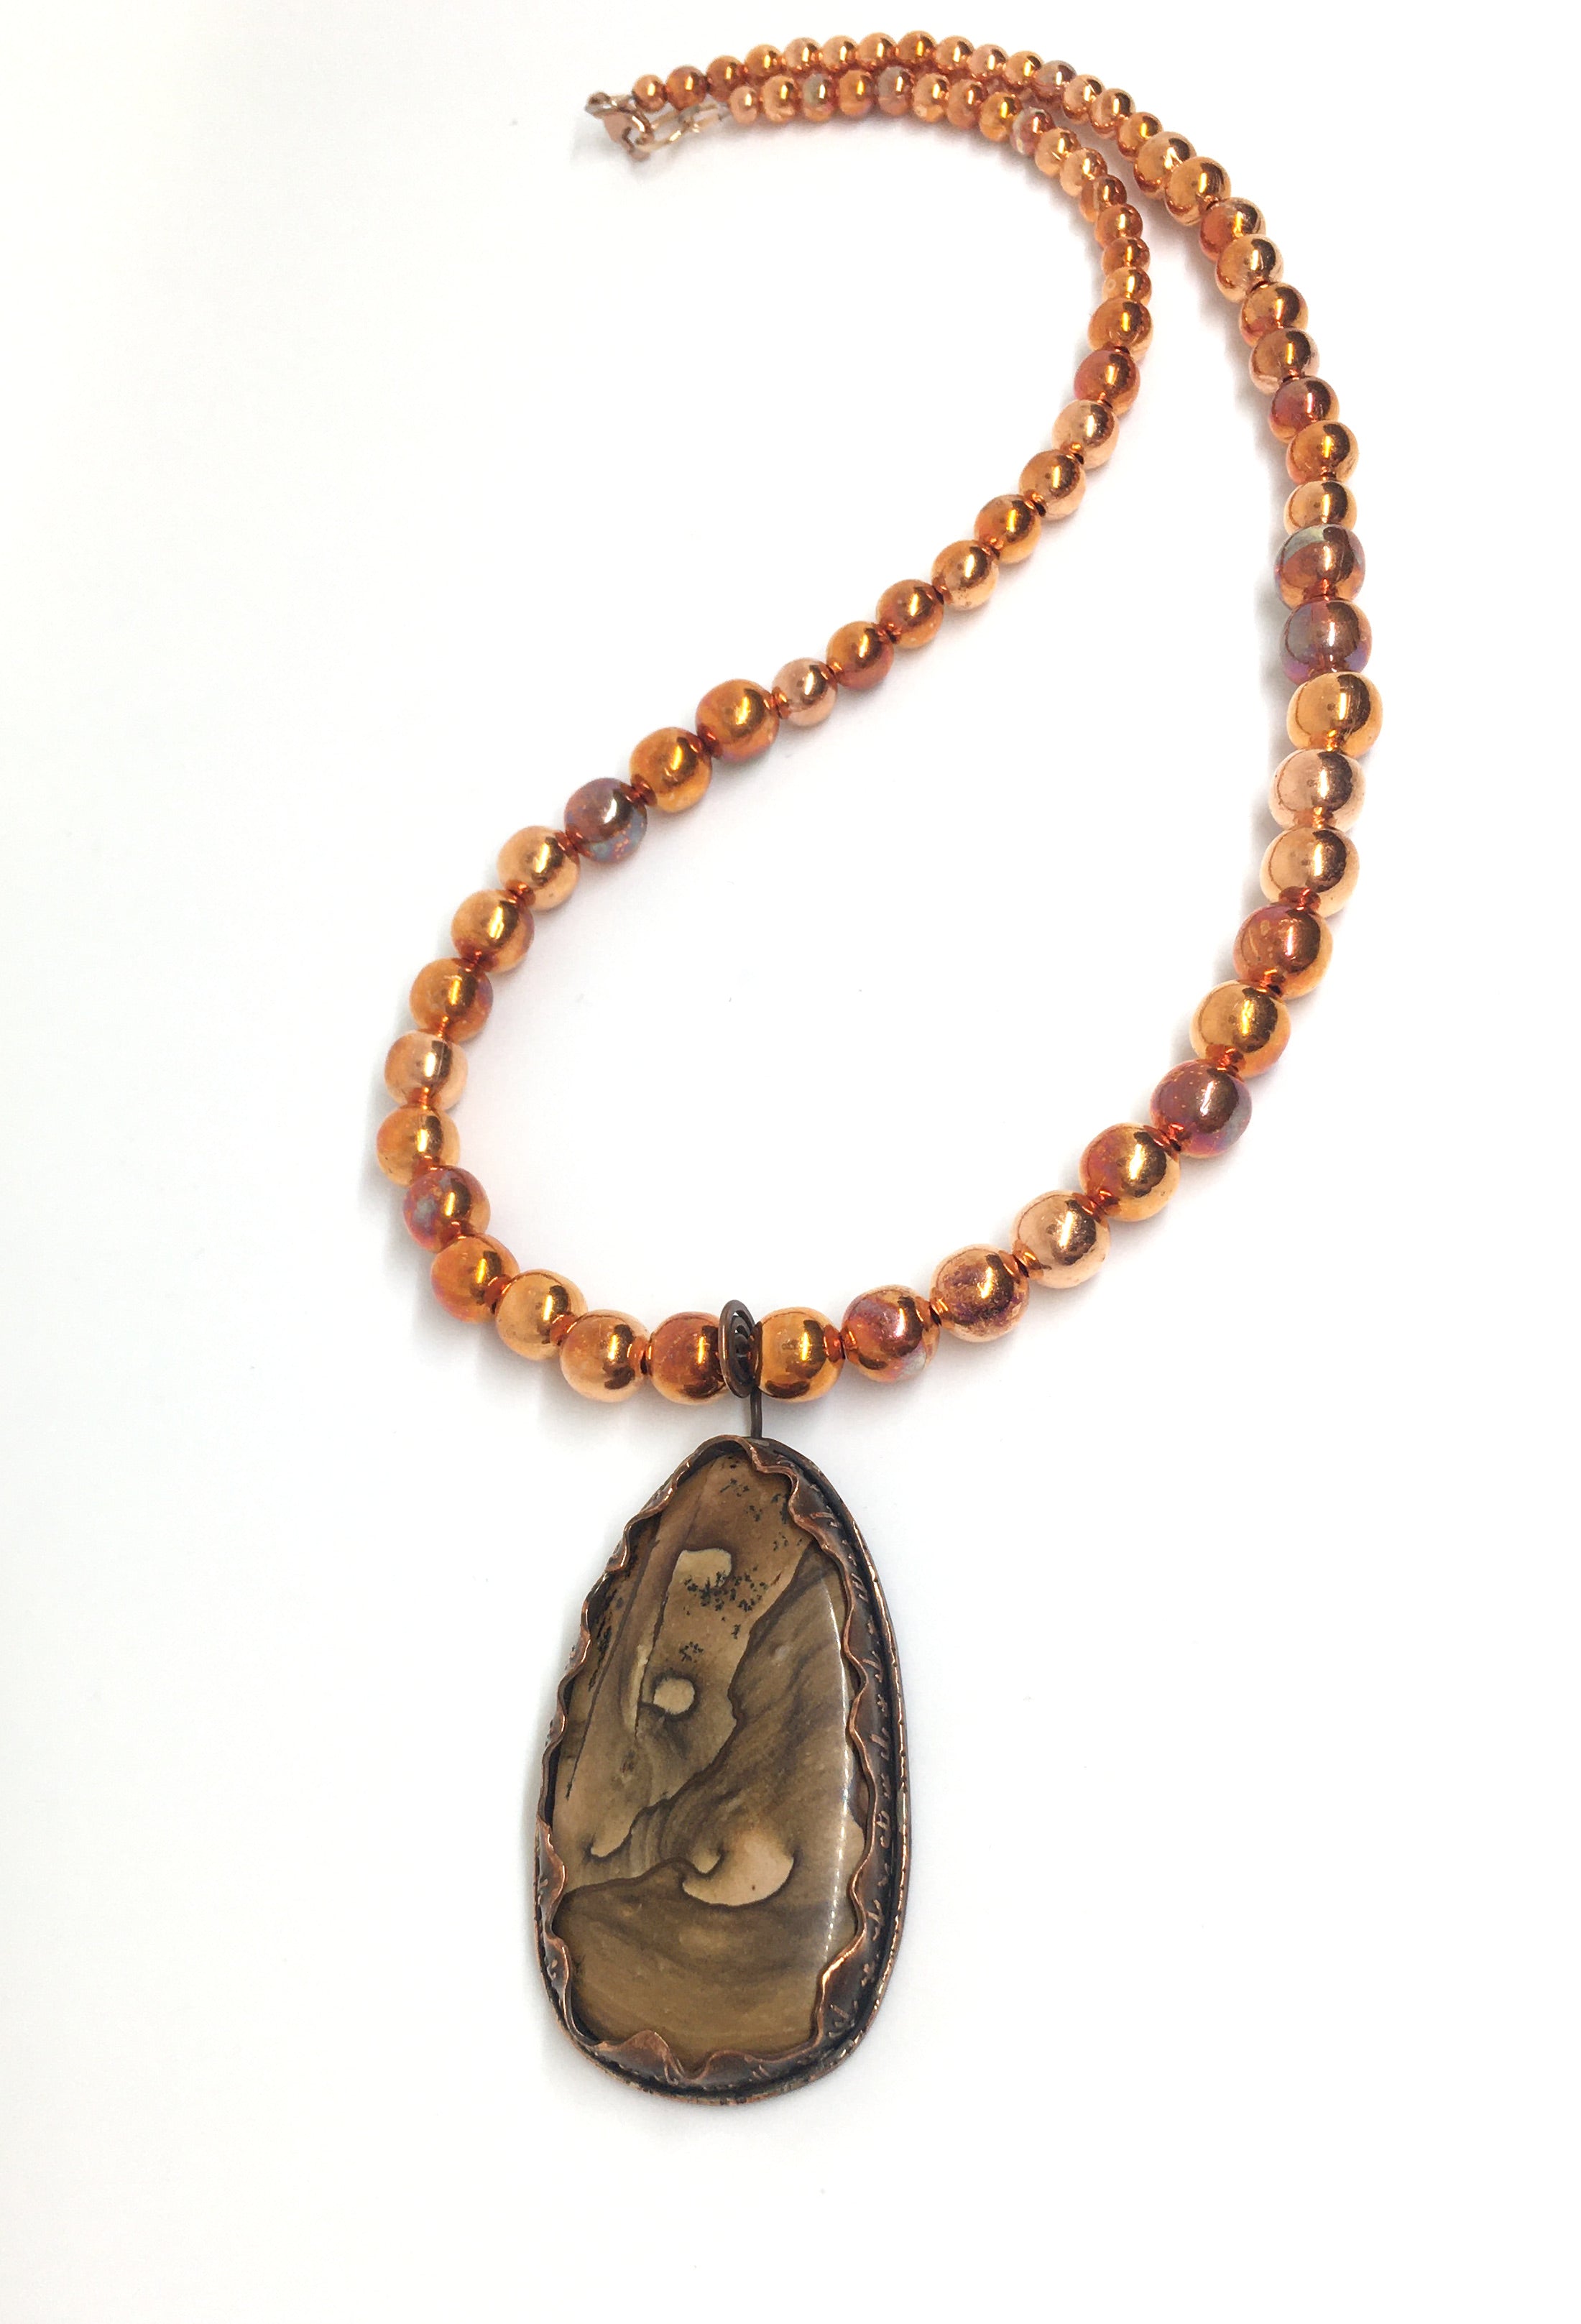 Biggs Jasper and Flame Painted Copper Bead Necklace - Sonoran Sunset Collection